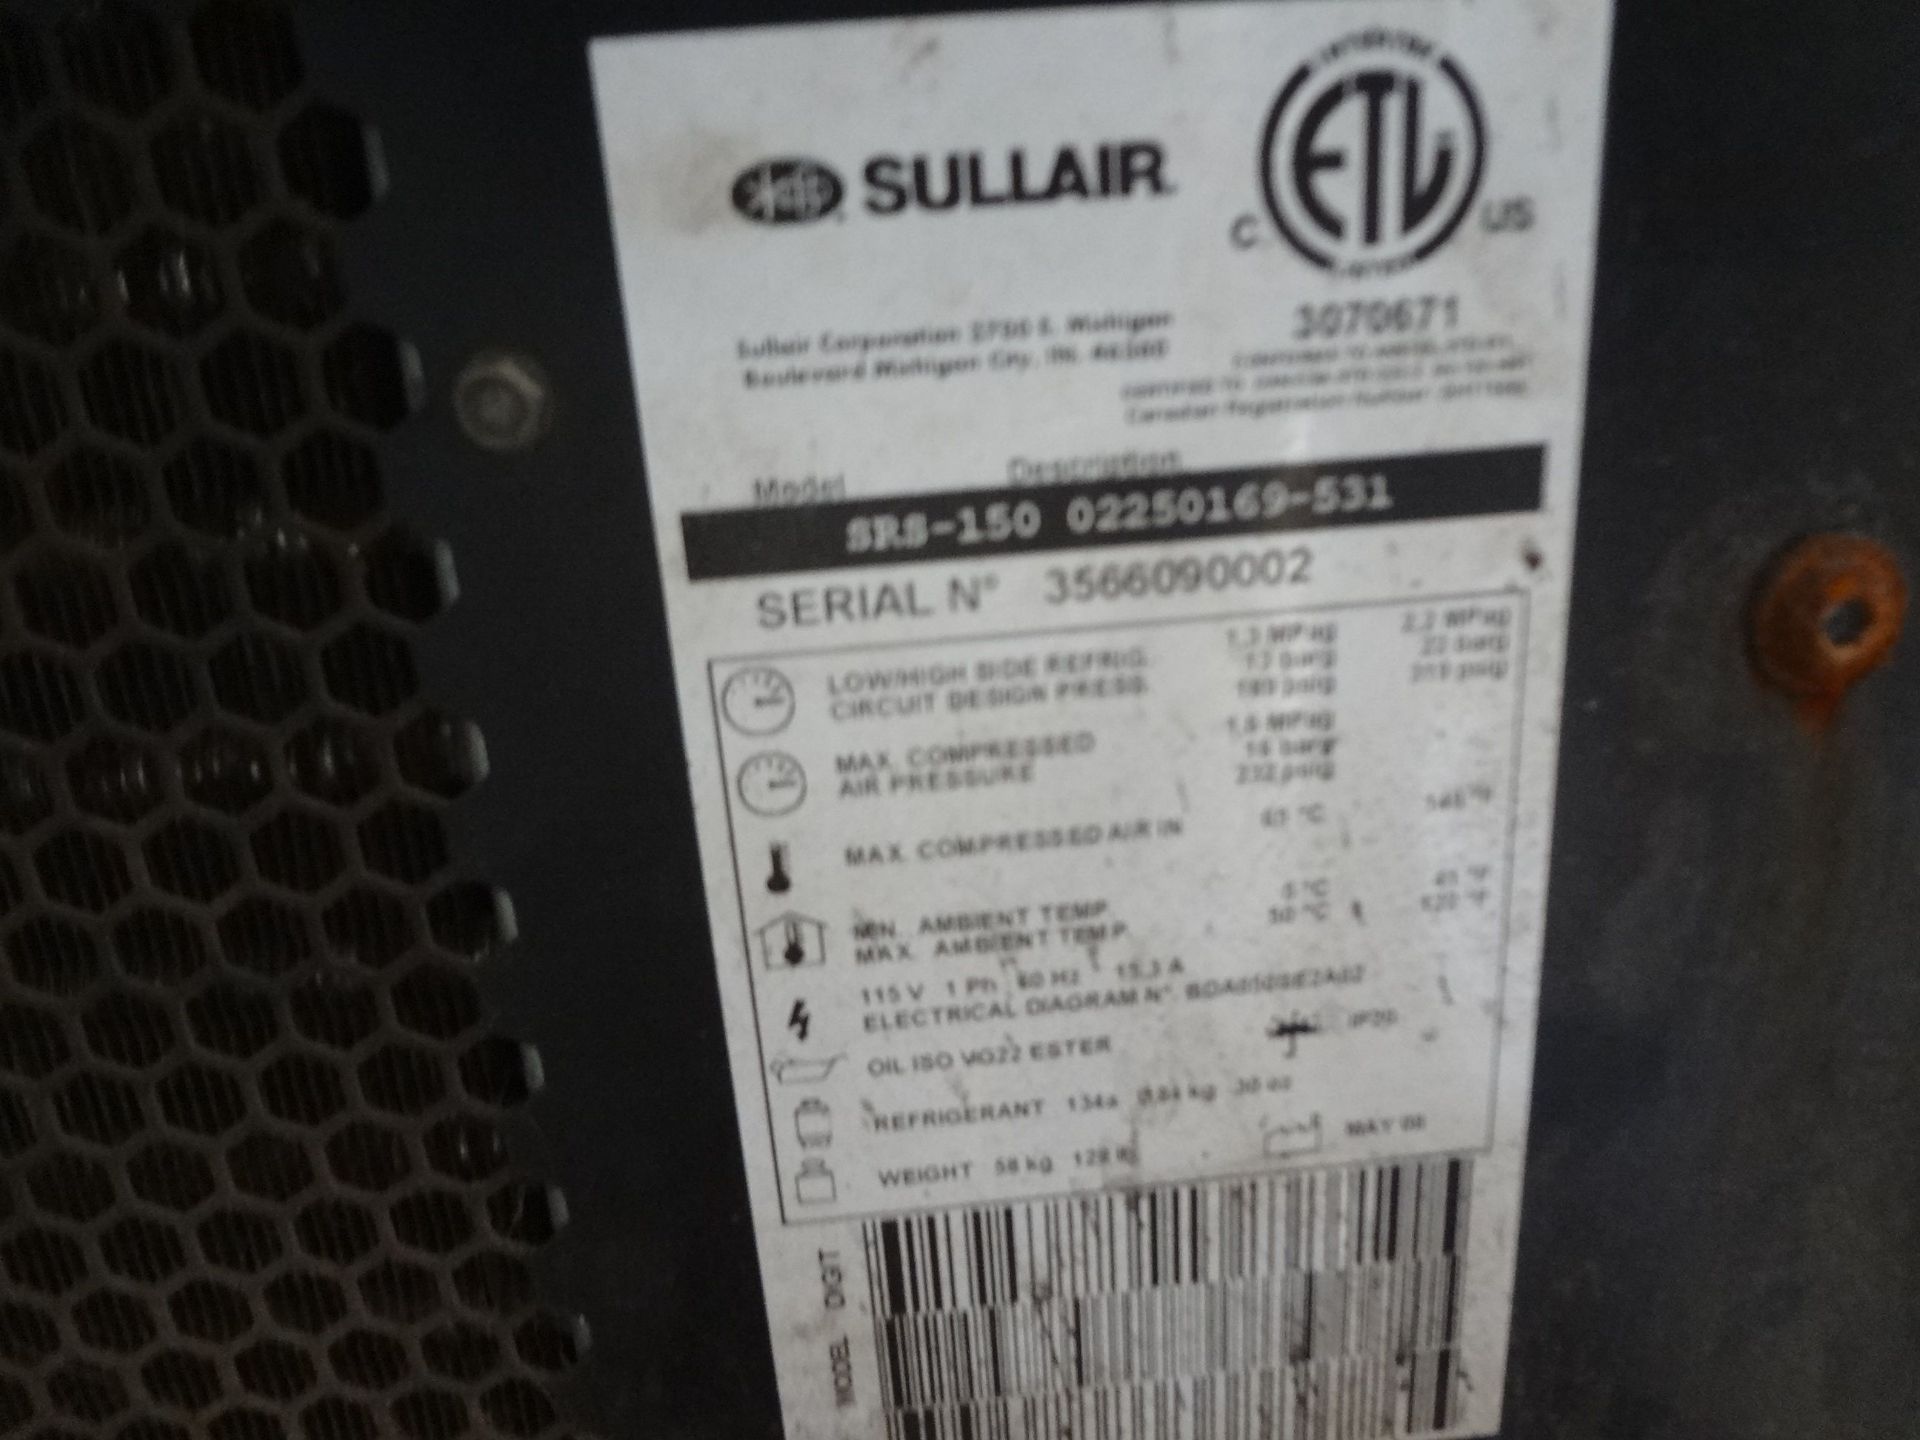 SULLAIR MODEL SRS-150 REFRIGERATED AIR DRYER; S/N 3566090002 - Image 2 of 2